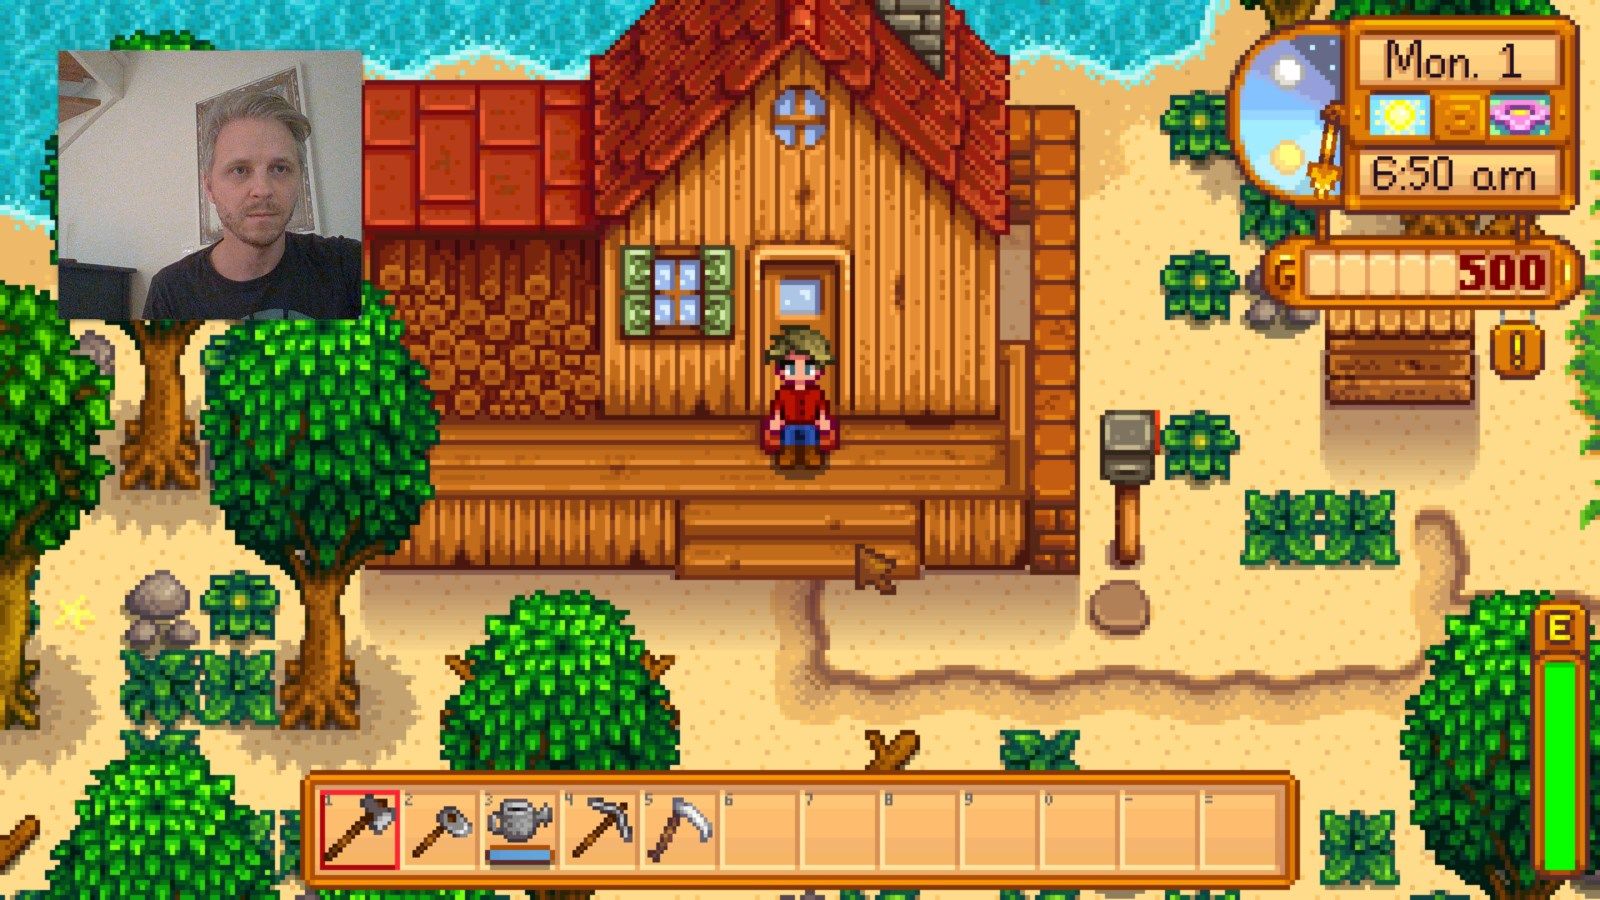 Show the webcam over video games, as in this example from the game Stardew Valley.